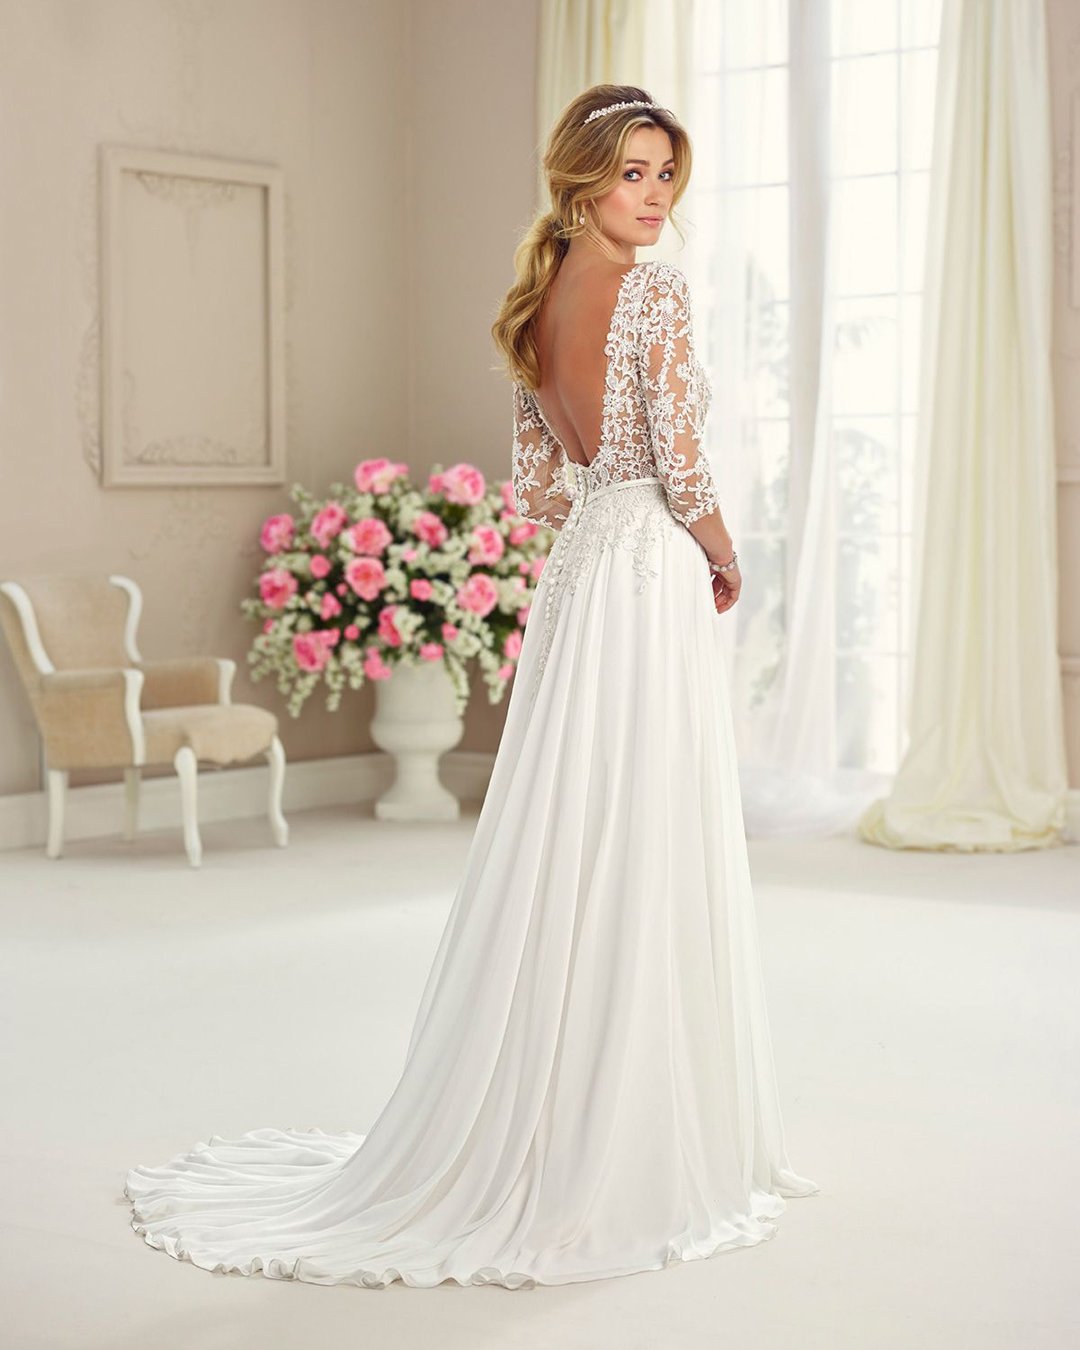 Wedding Dresses For Fall Best 10 wedding dresses for fall Find the